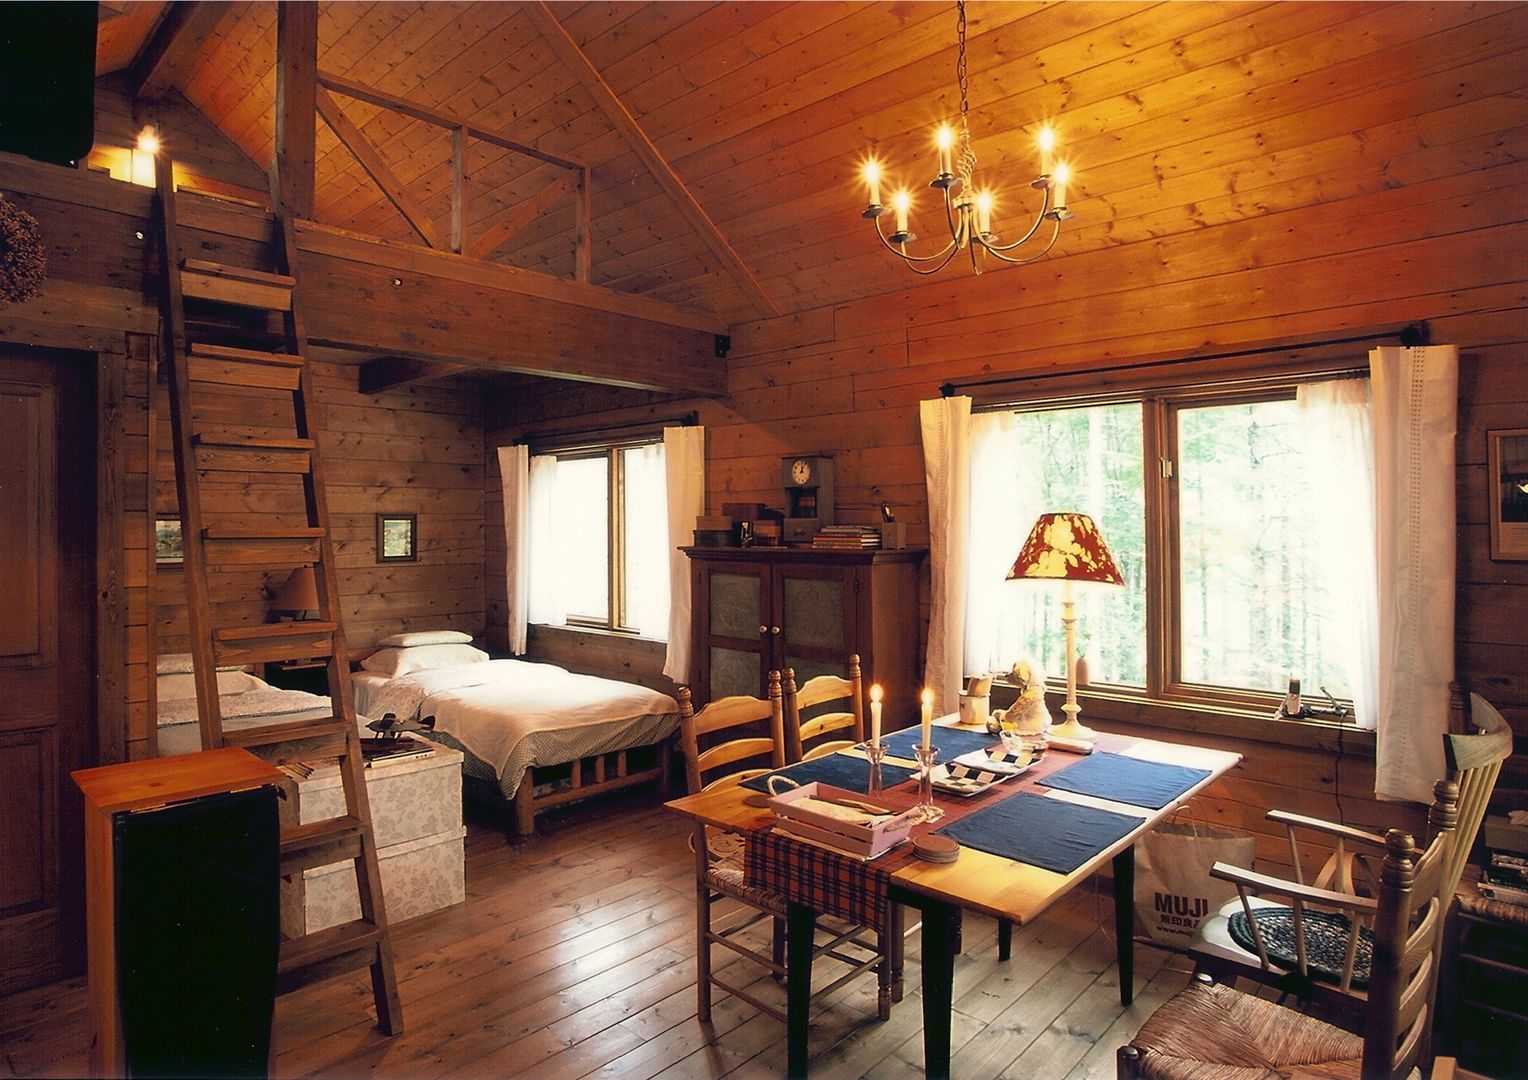 Small Cottage at Mt.Yatsugatake, Japan, Cottage Style / コテージスタイル Cottage Style / コテージスタイル Дневна соба